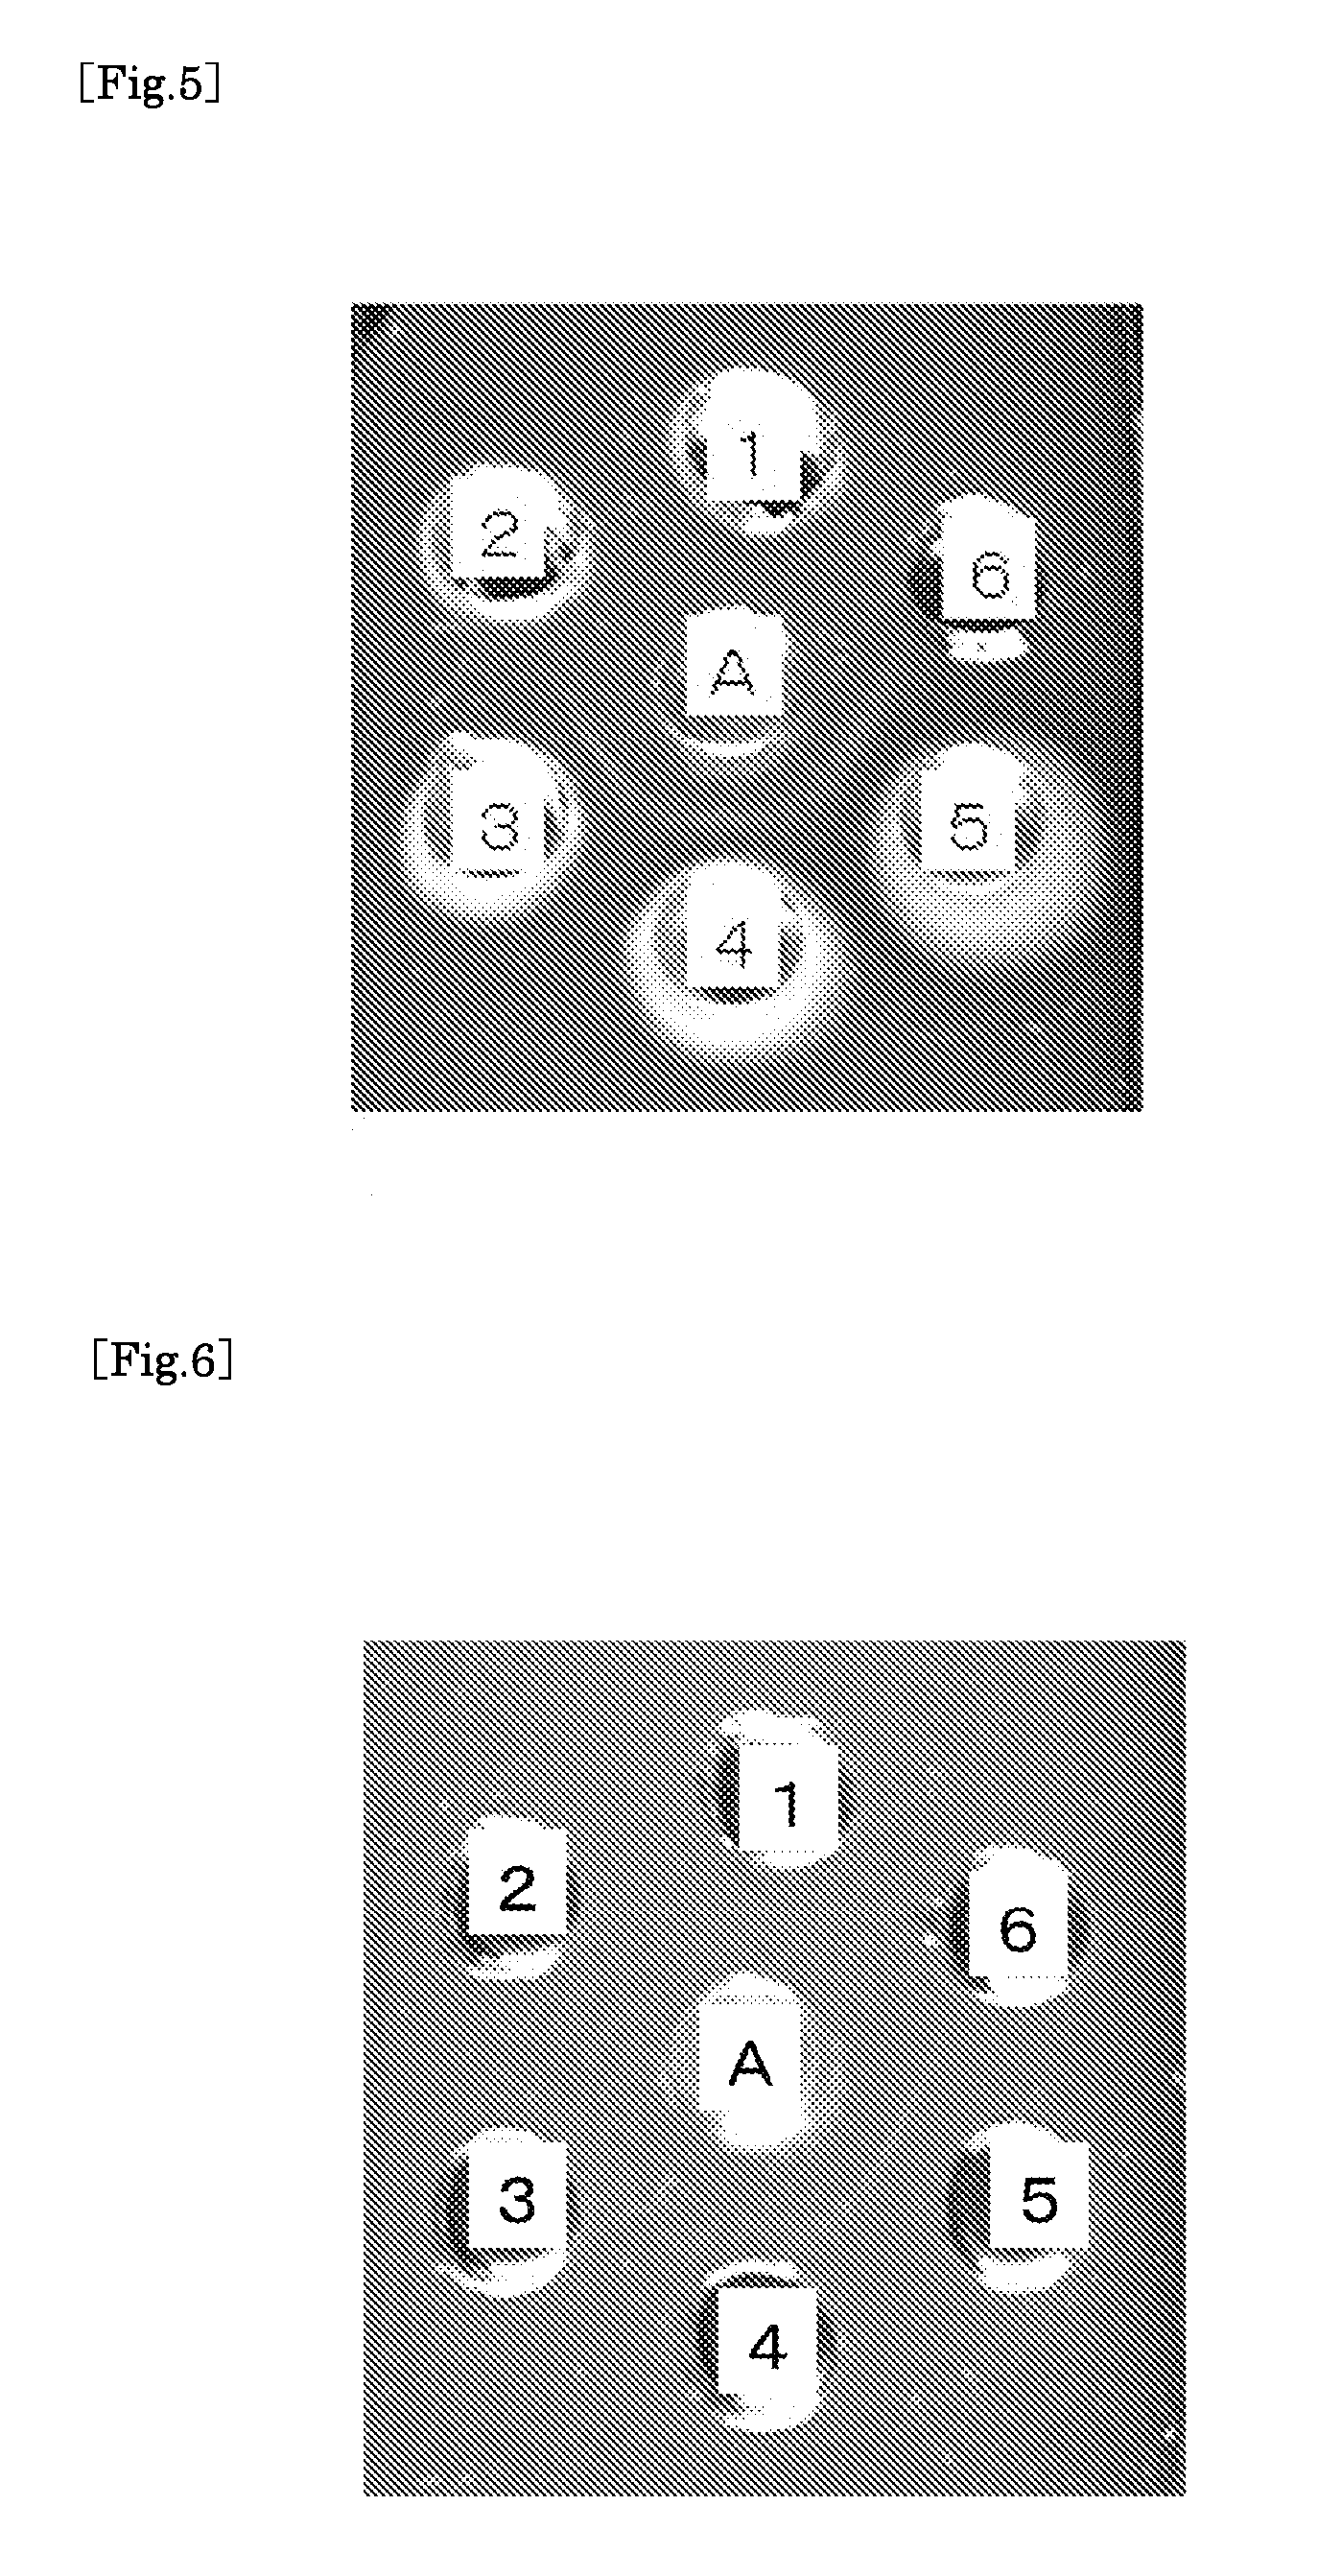 Antibody produced using ostrich and method for production thereof